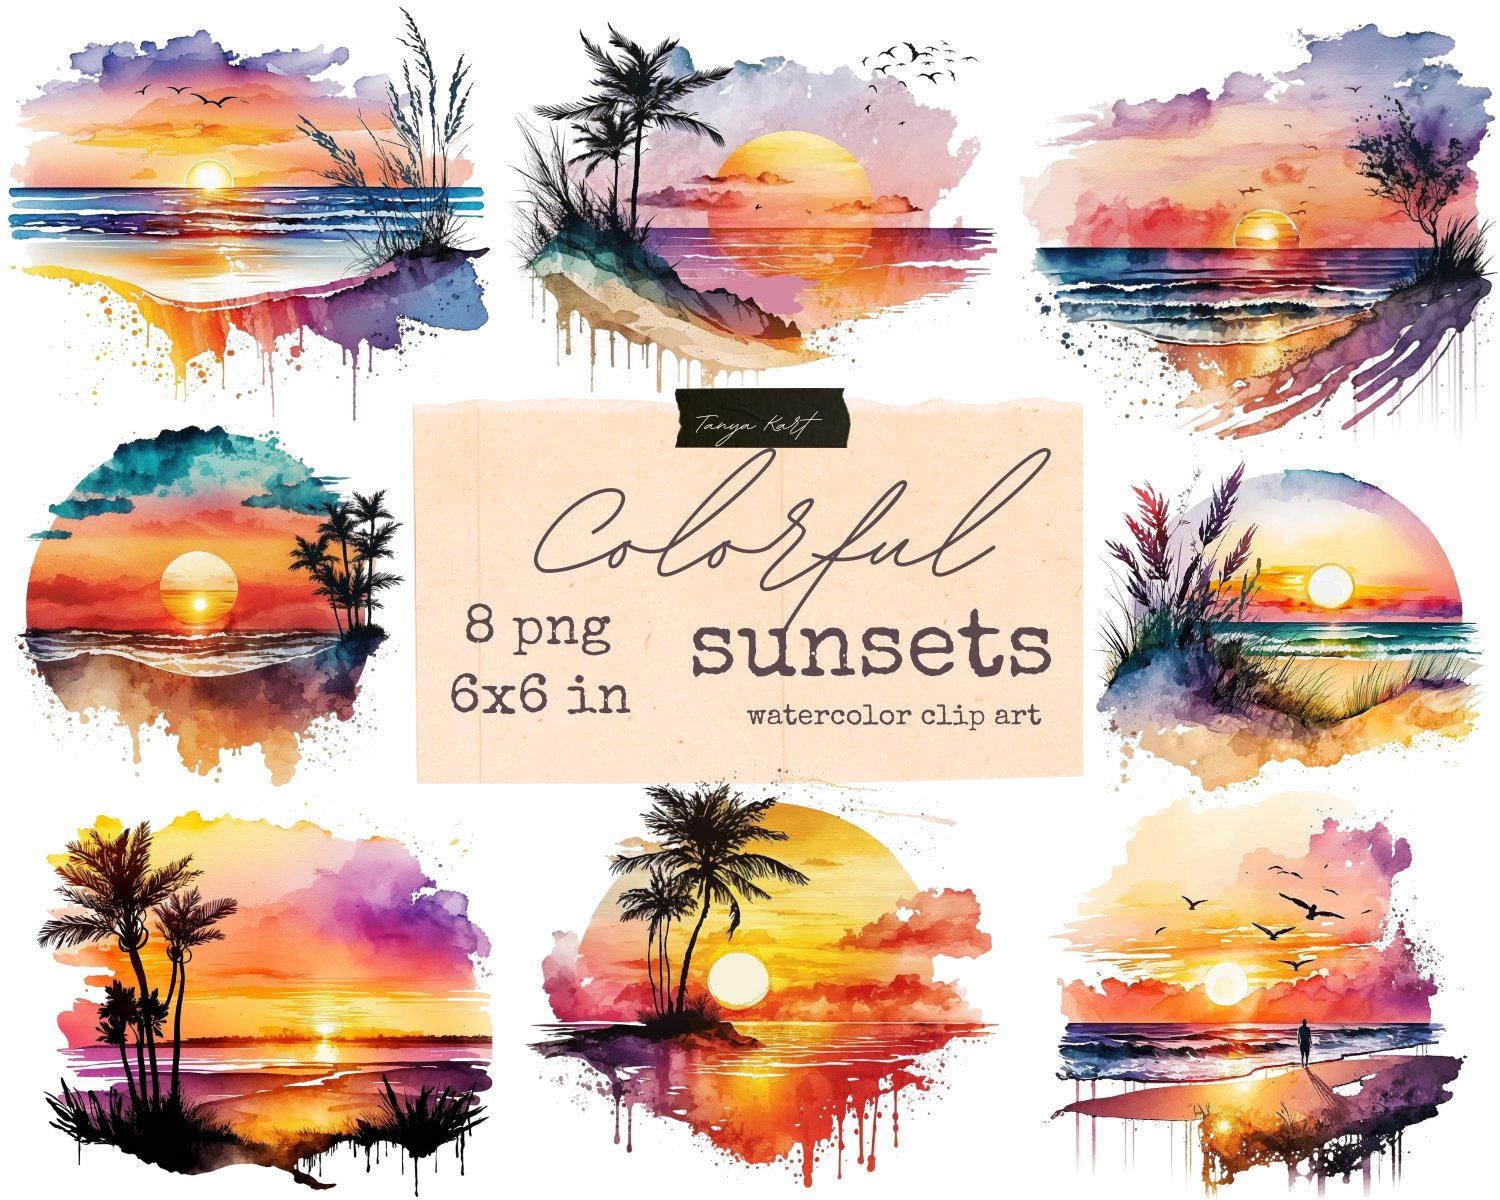 Colorful Sunsets Png Clipart cover image.